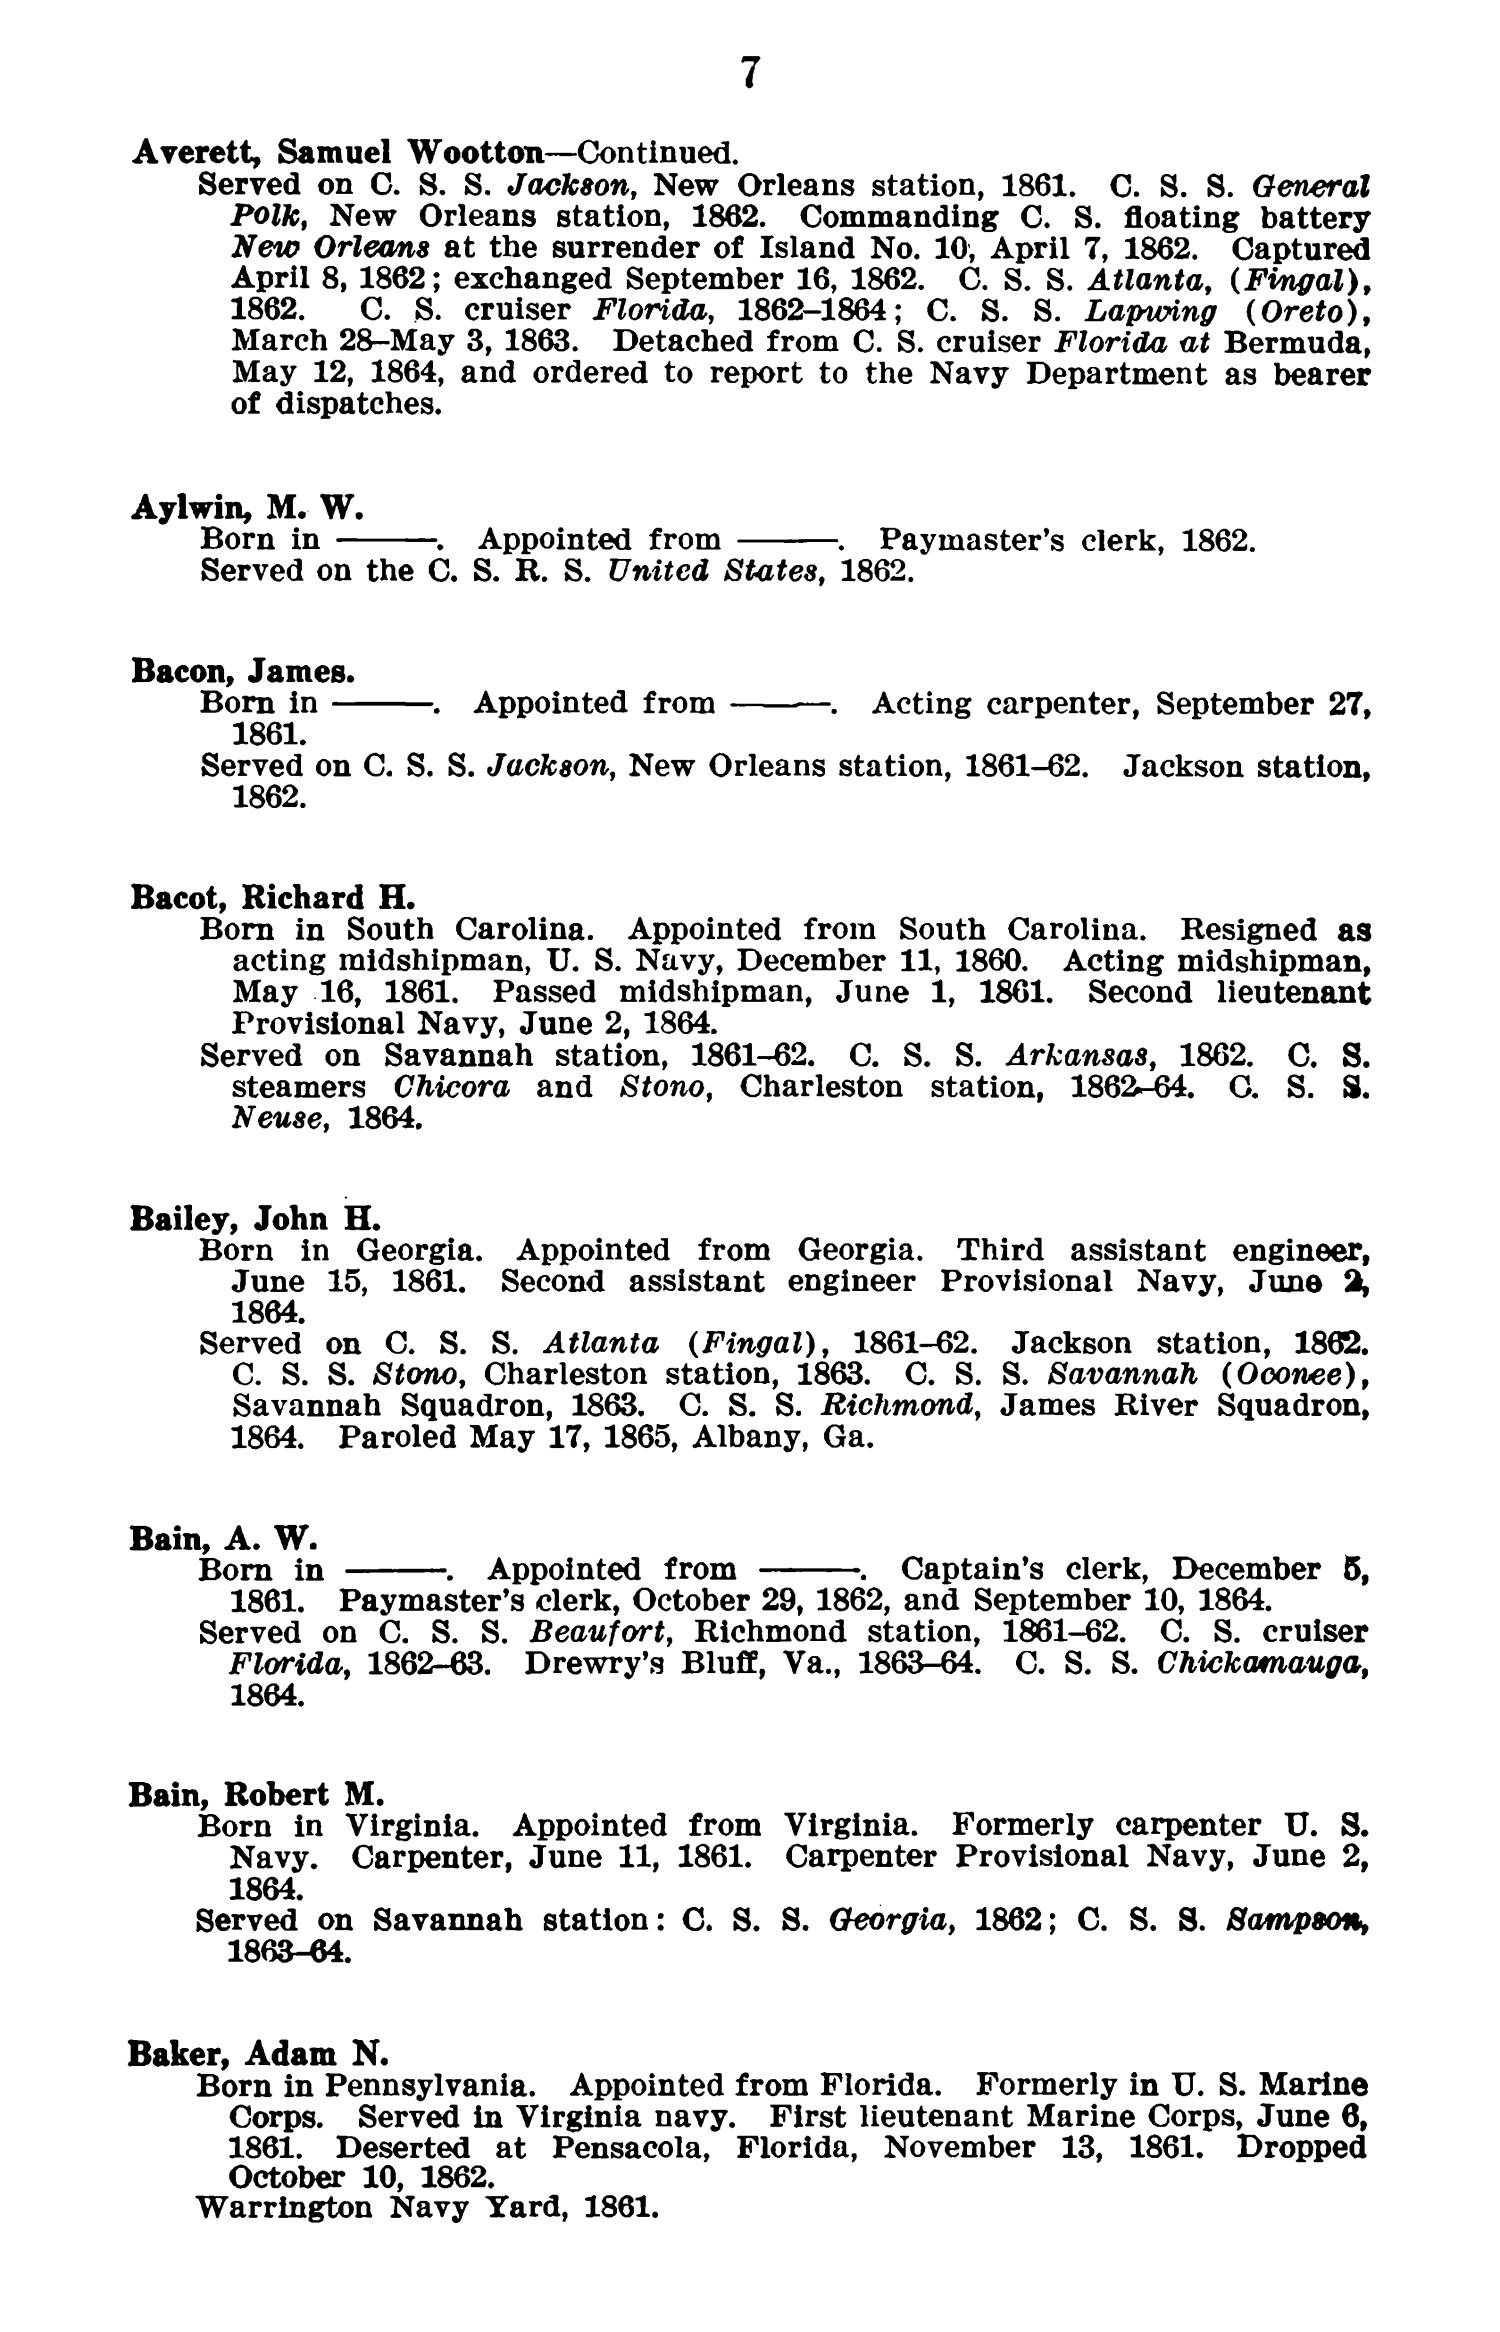 Register of Officers of the Confederate States Navy, 1861--1865
                                                
                                                    7
                                                